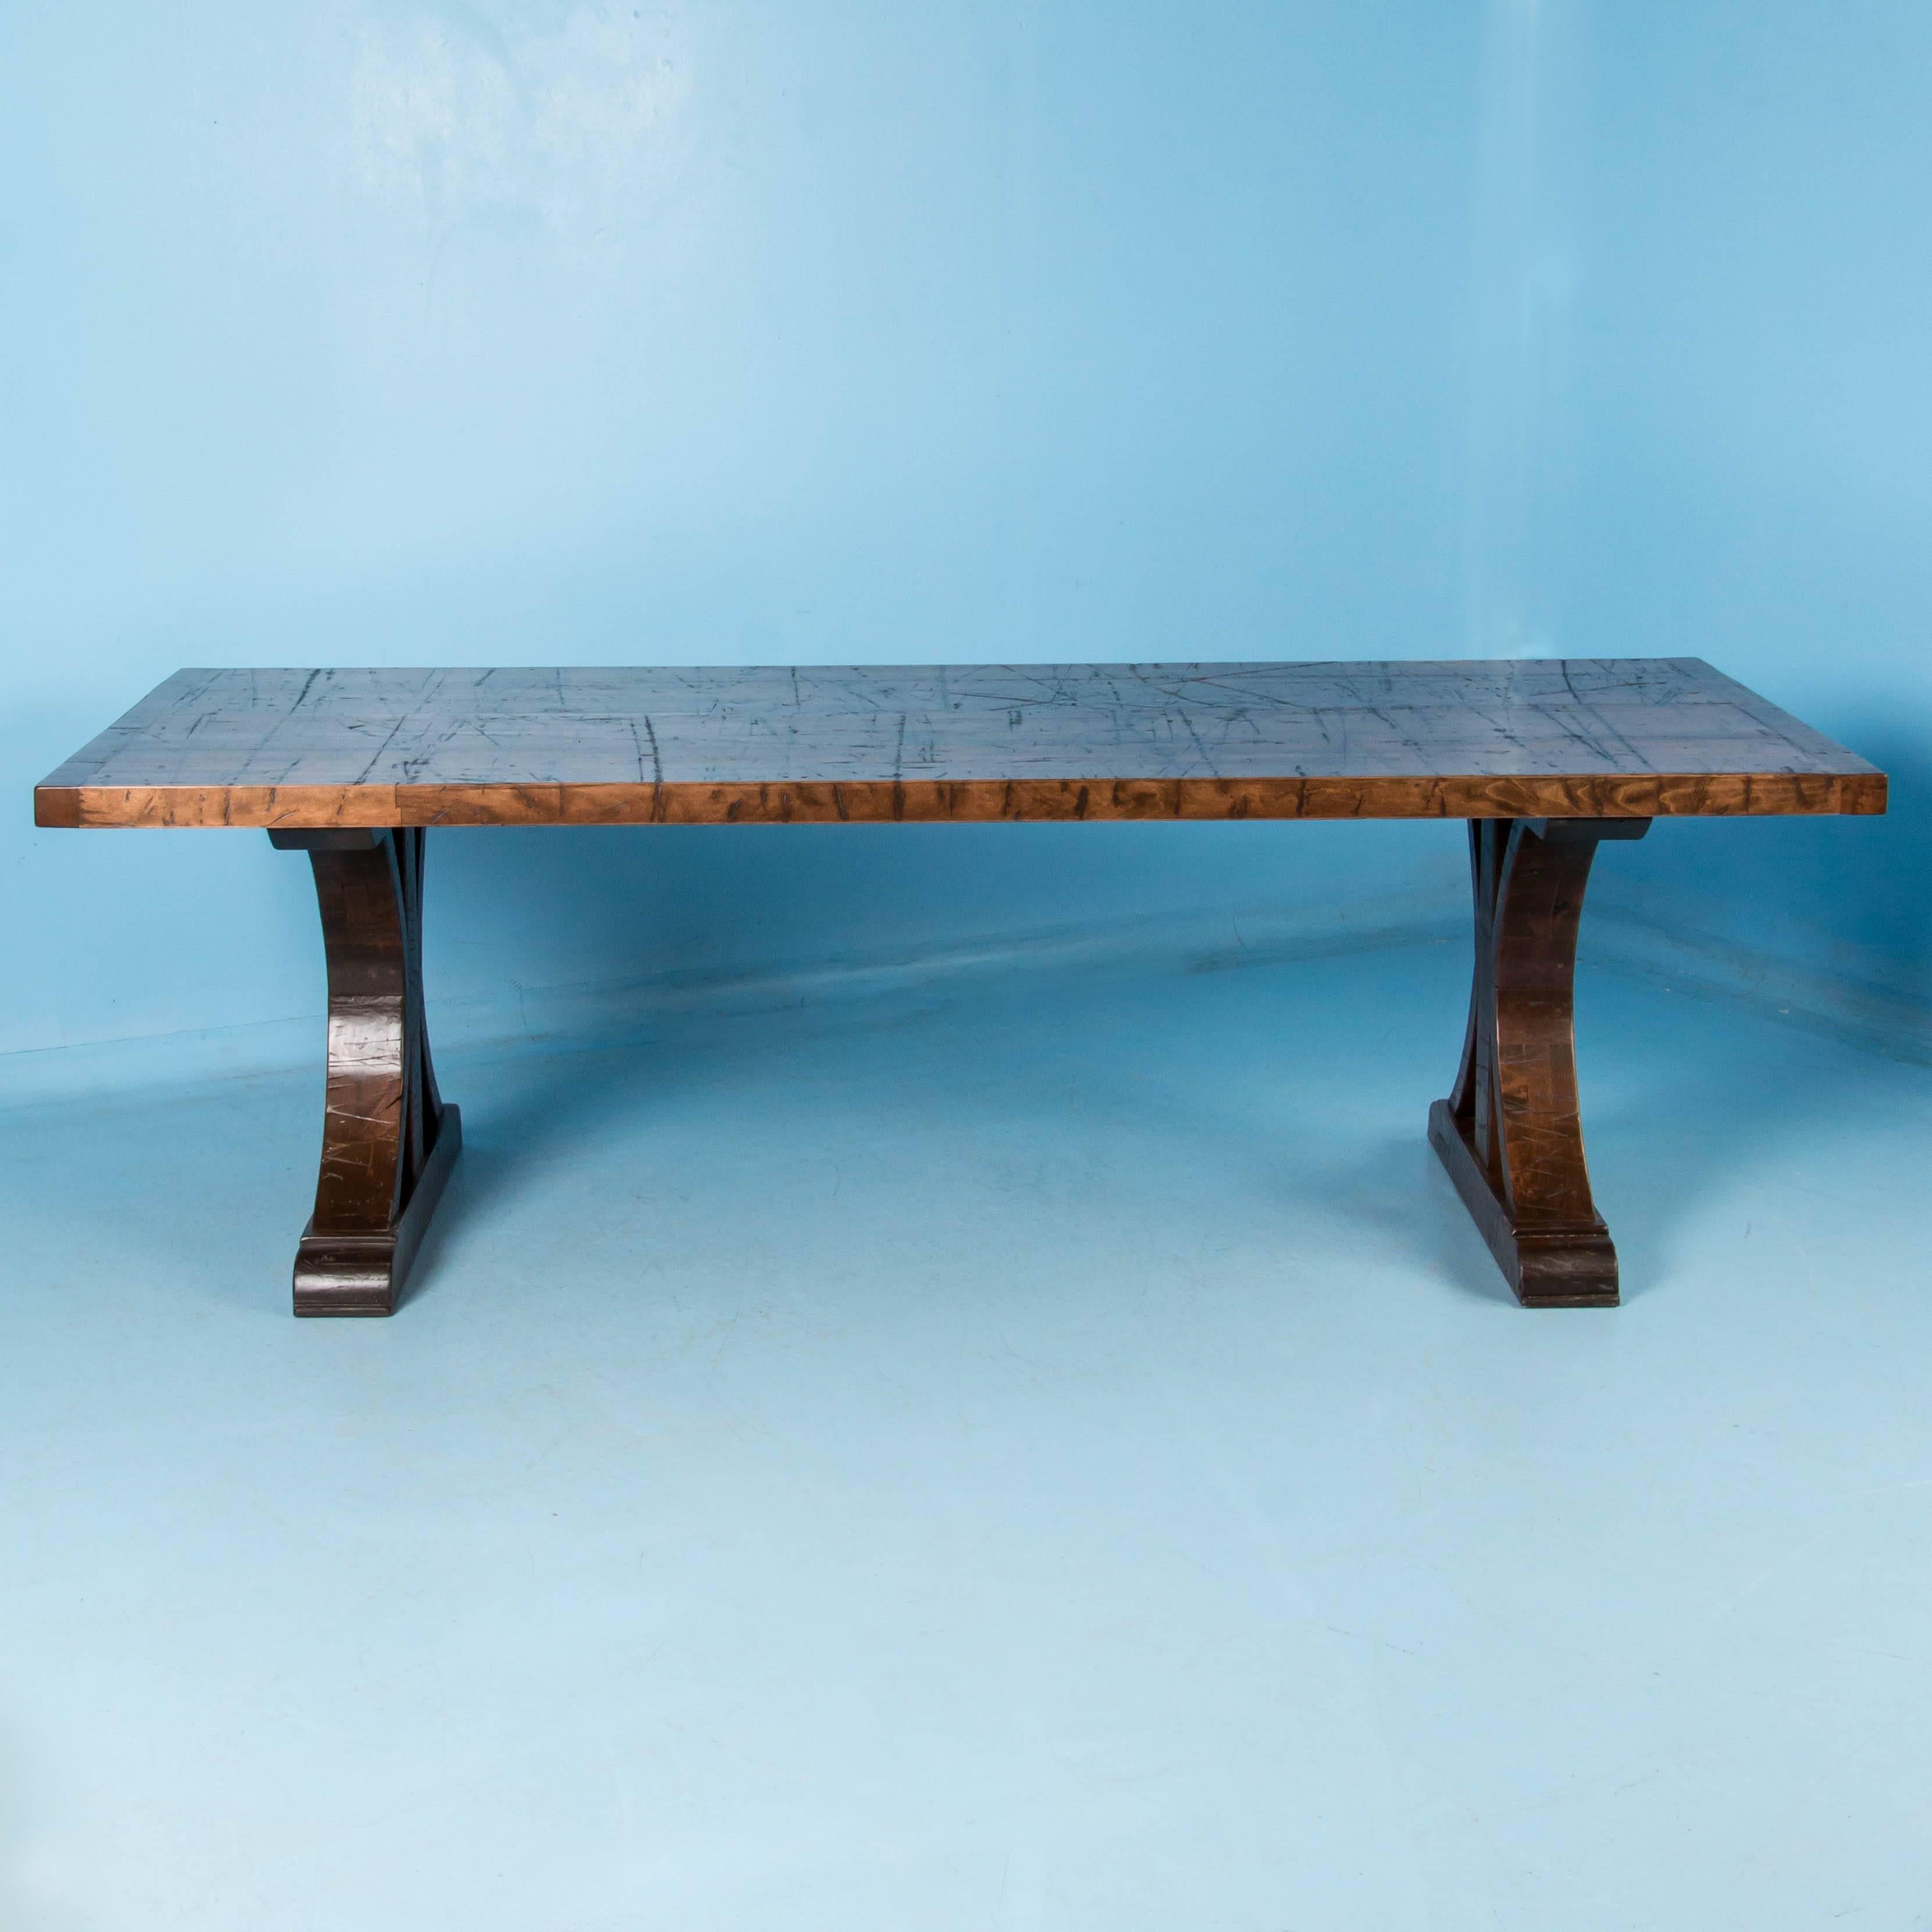 This 8' long dining table was custom-made using antique reclaimed maple boxcar flooring. The distressed wood is a result of years of moving cargo through the train’s boxcars, it has been sanded, stained and given a strong finish for daily use. The